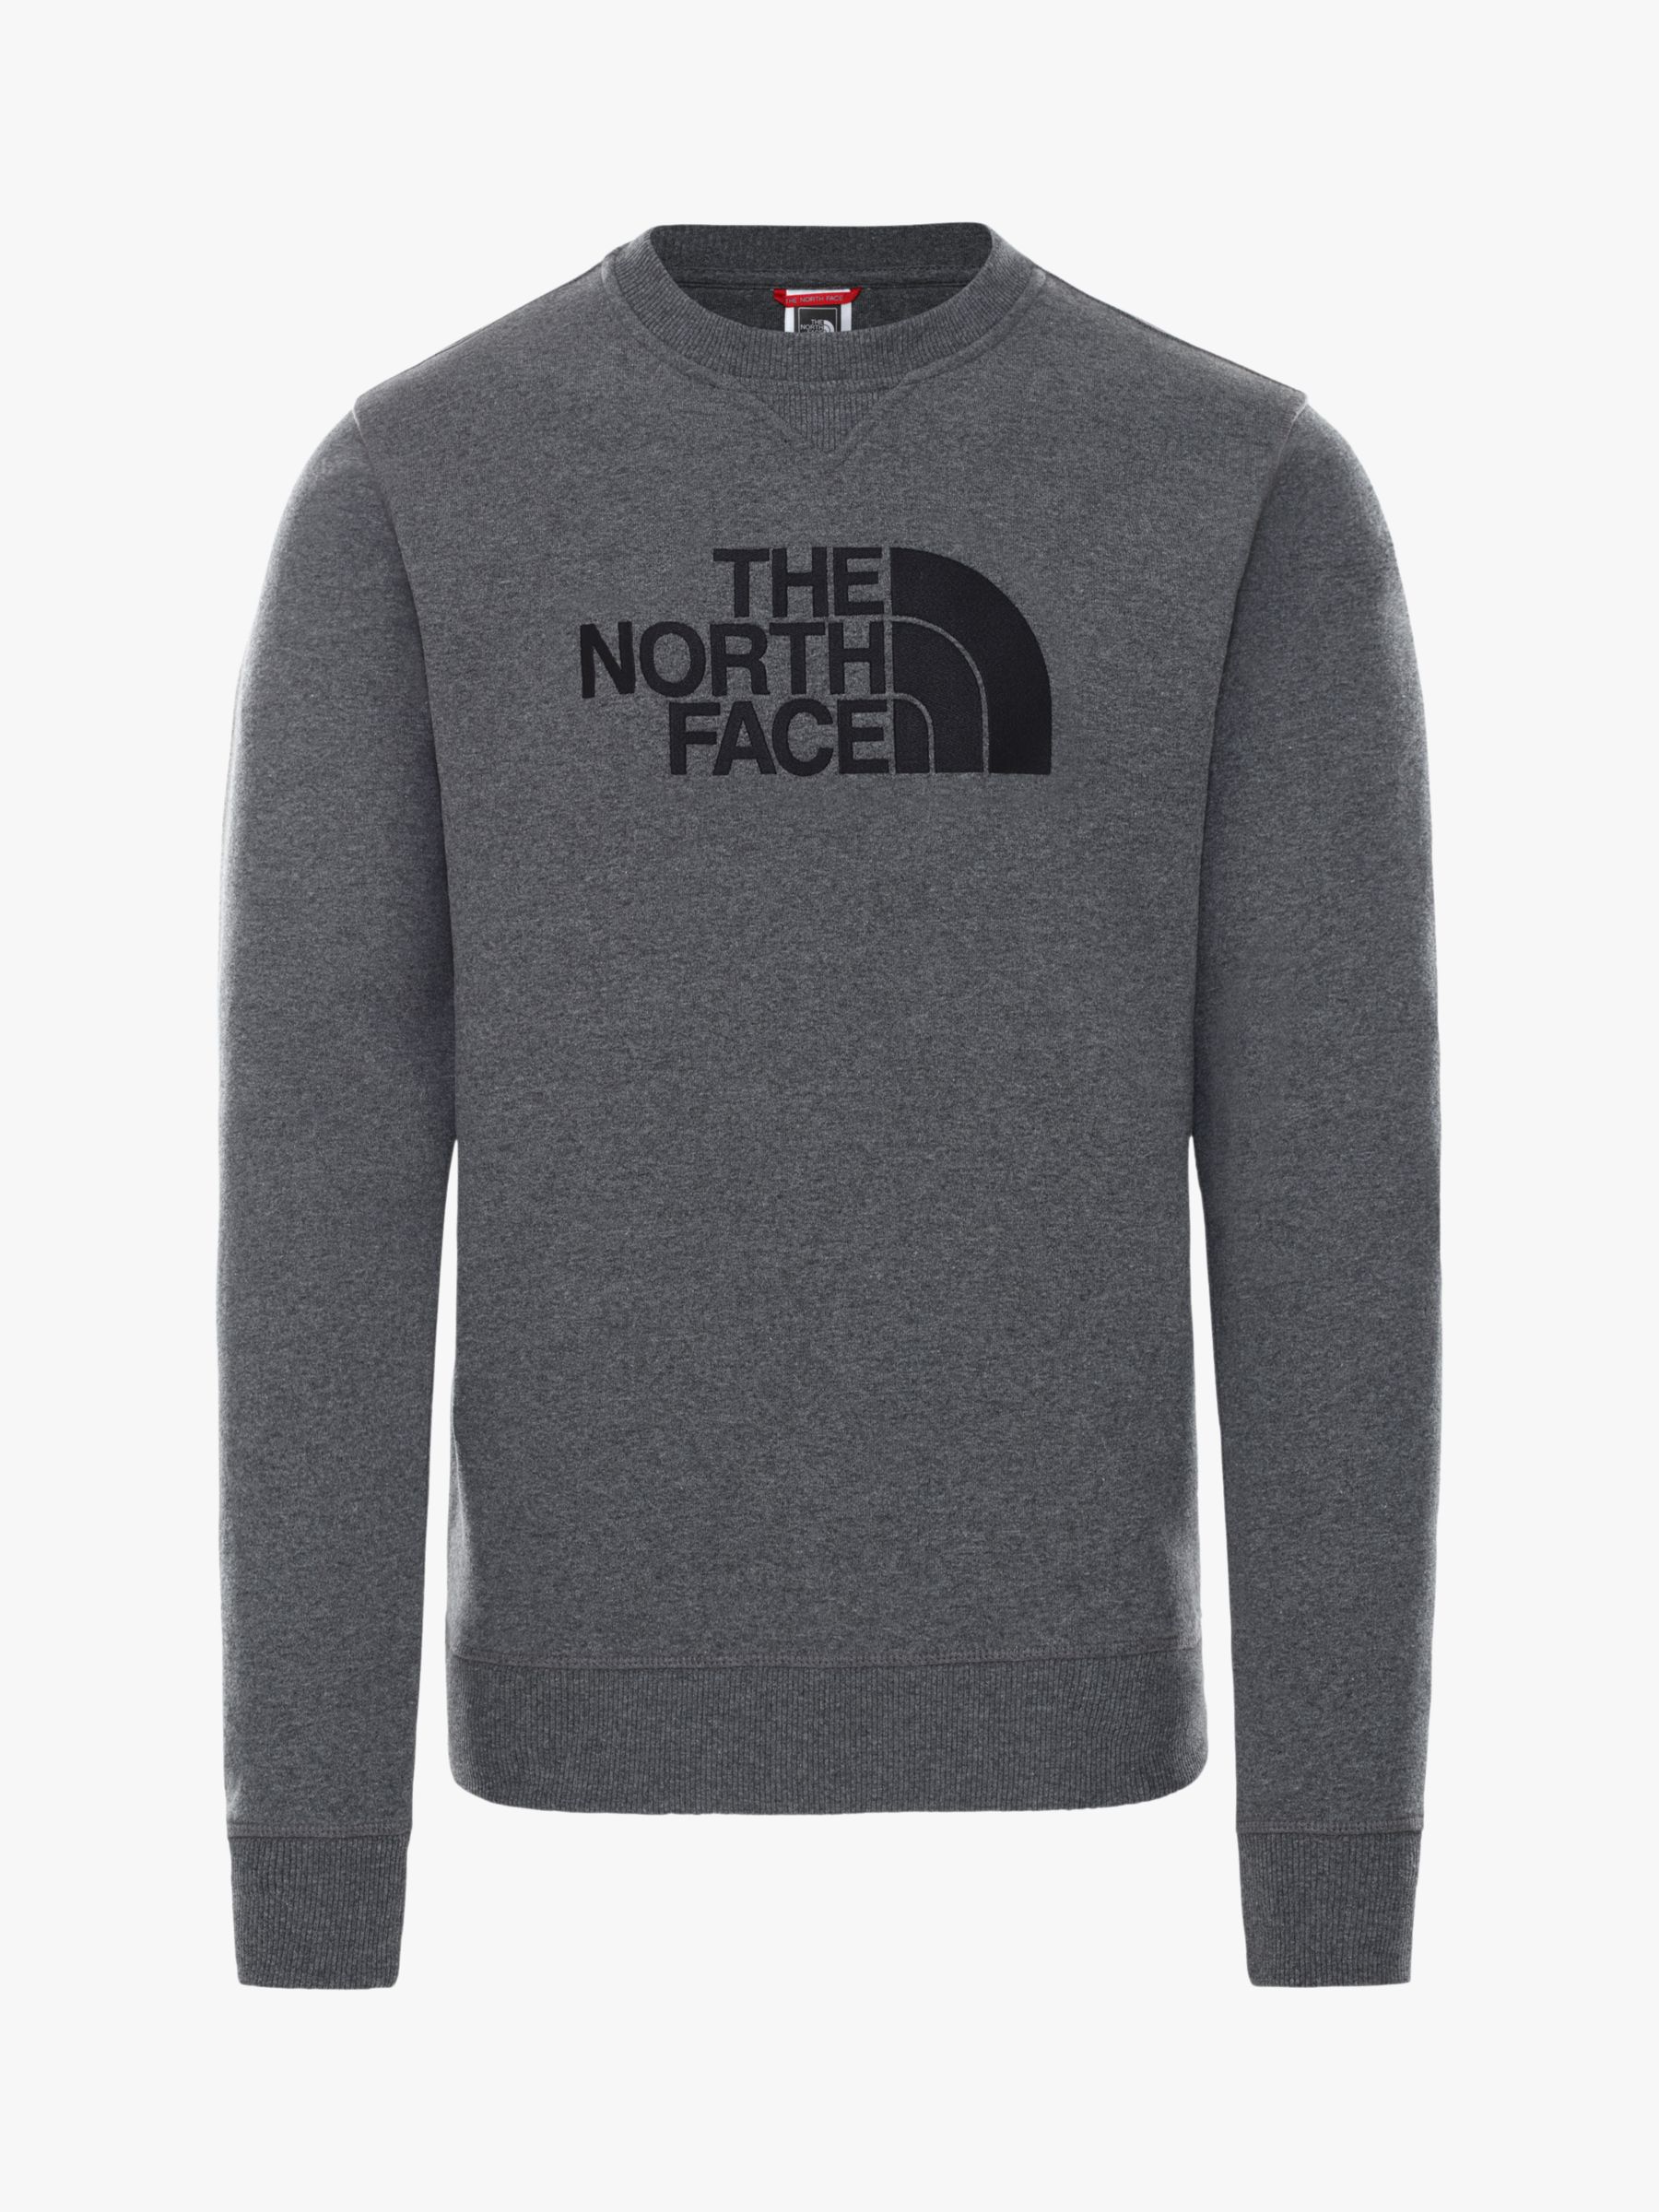 northface jumpers